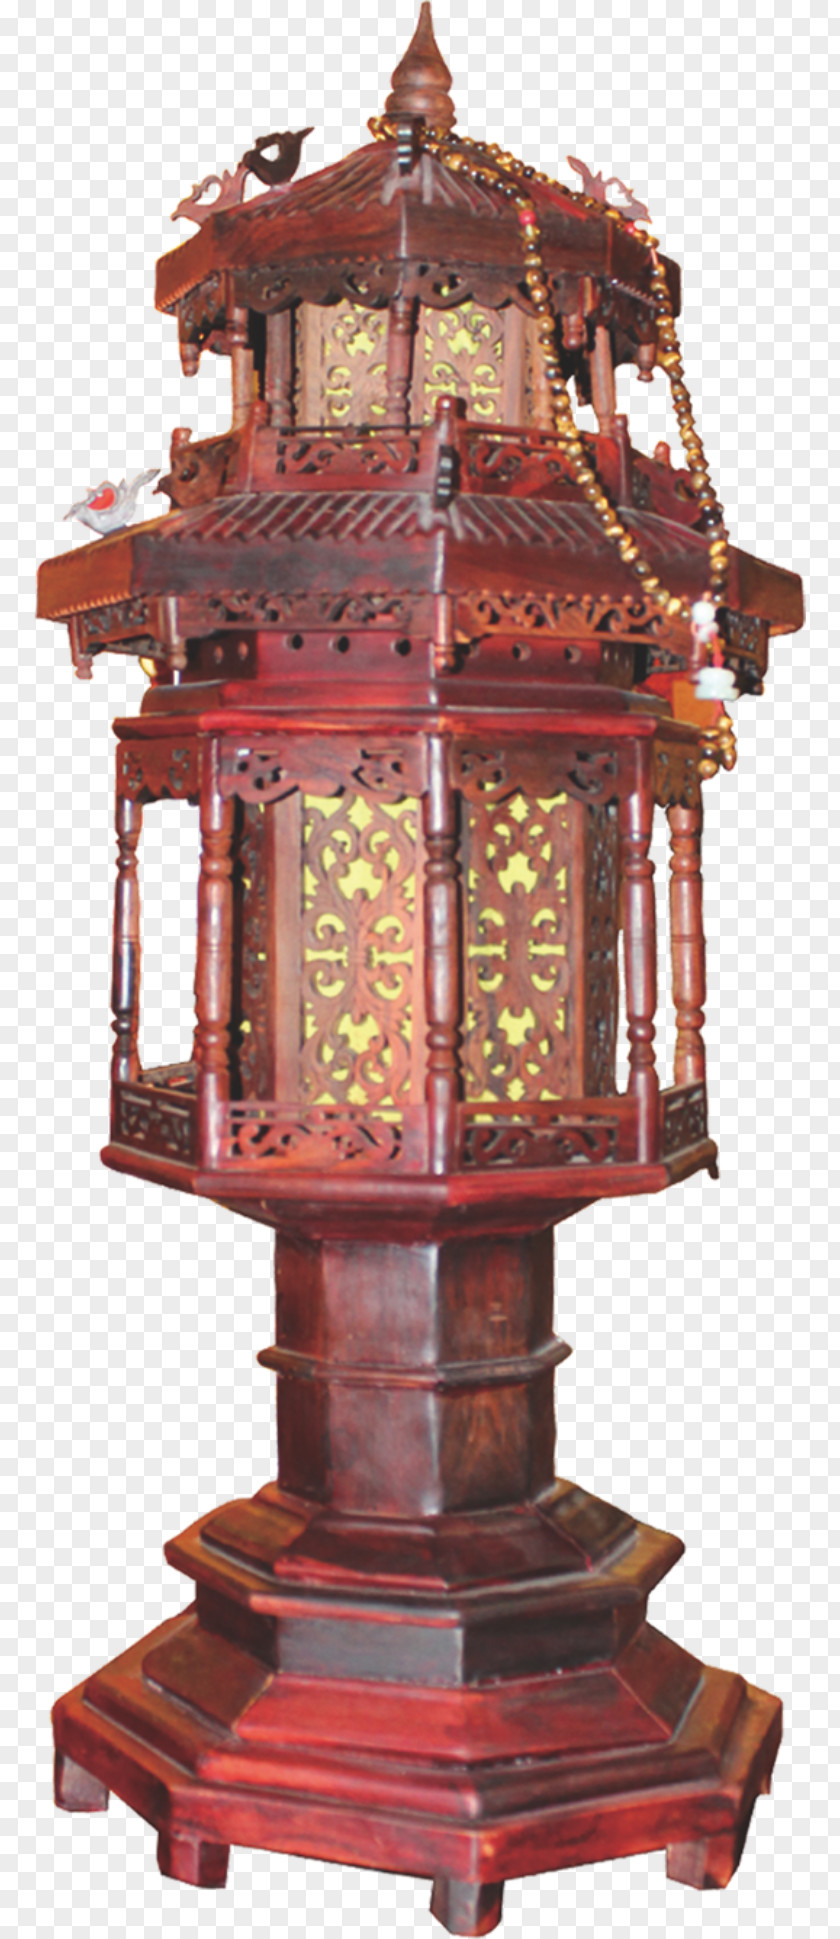 Antique Wooden Lamp Download Computer File PNG